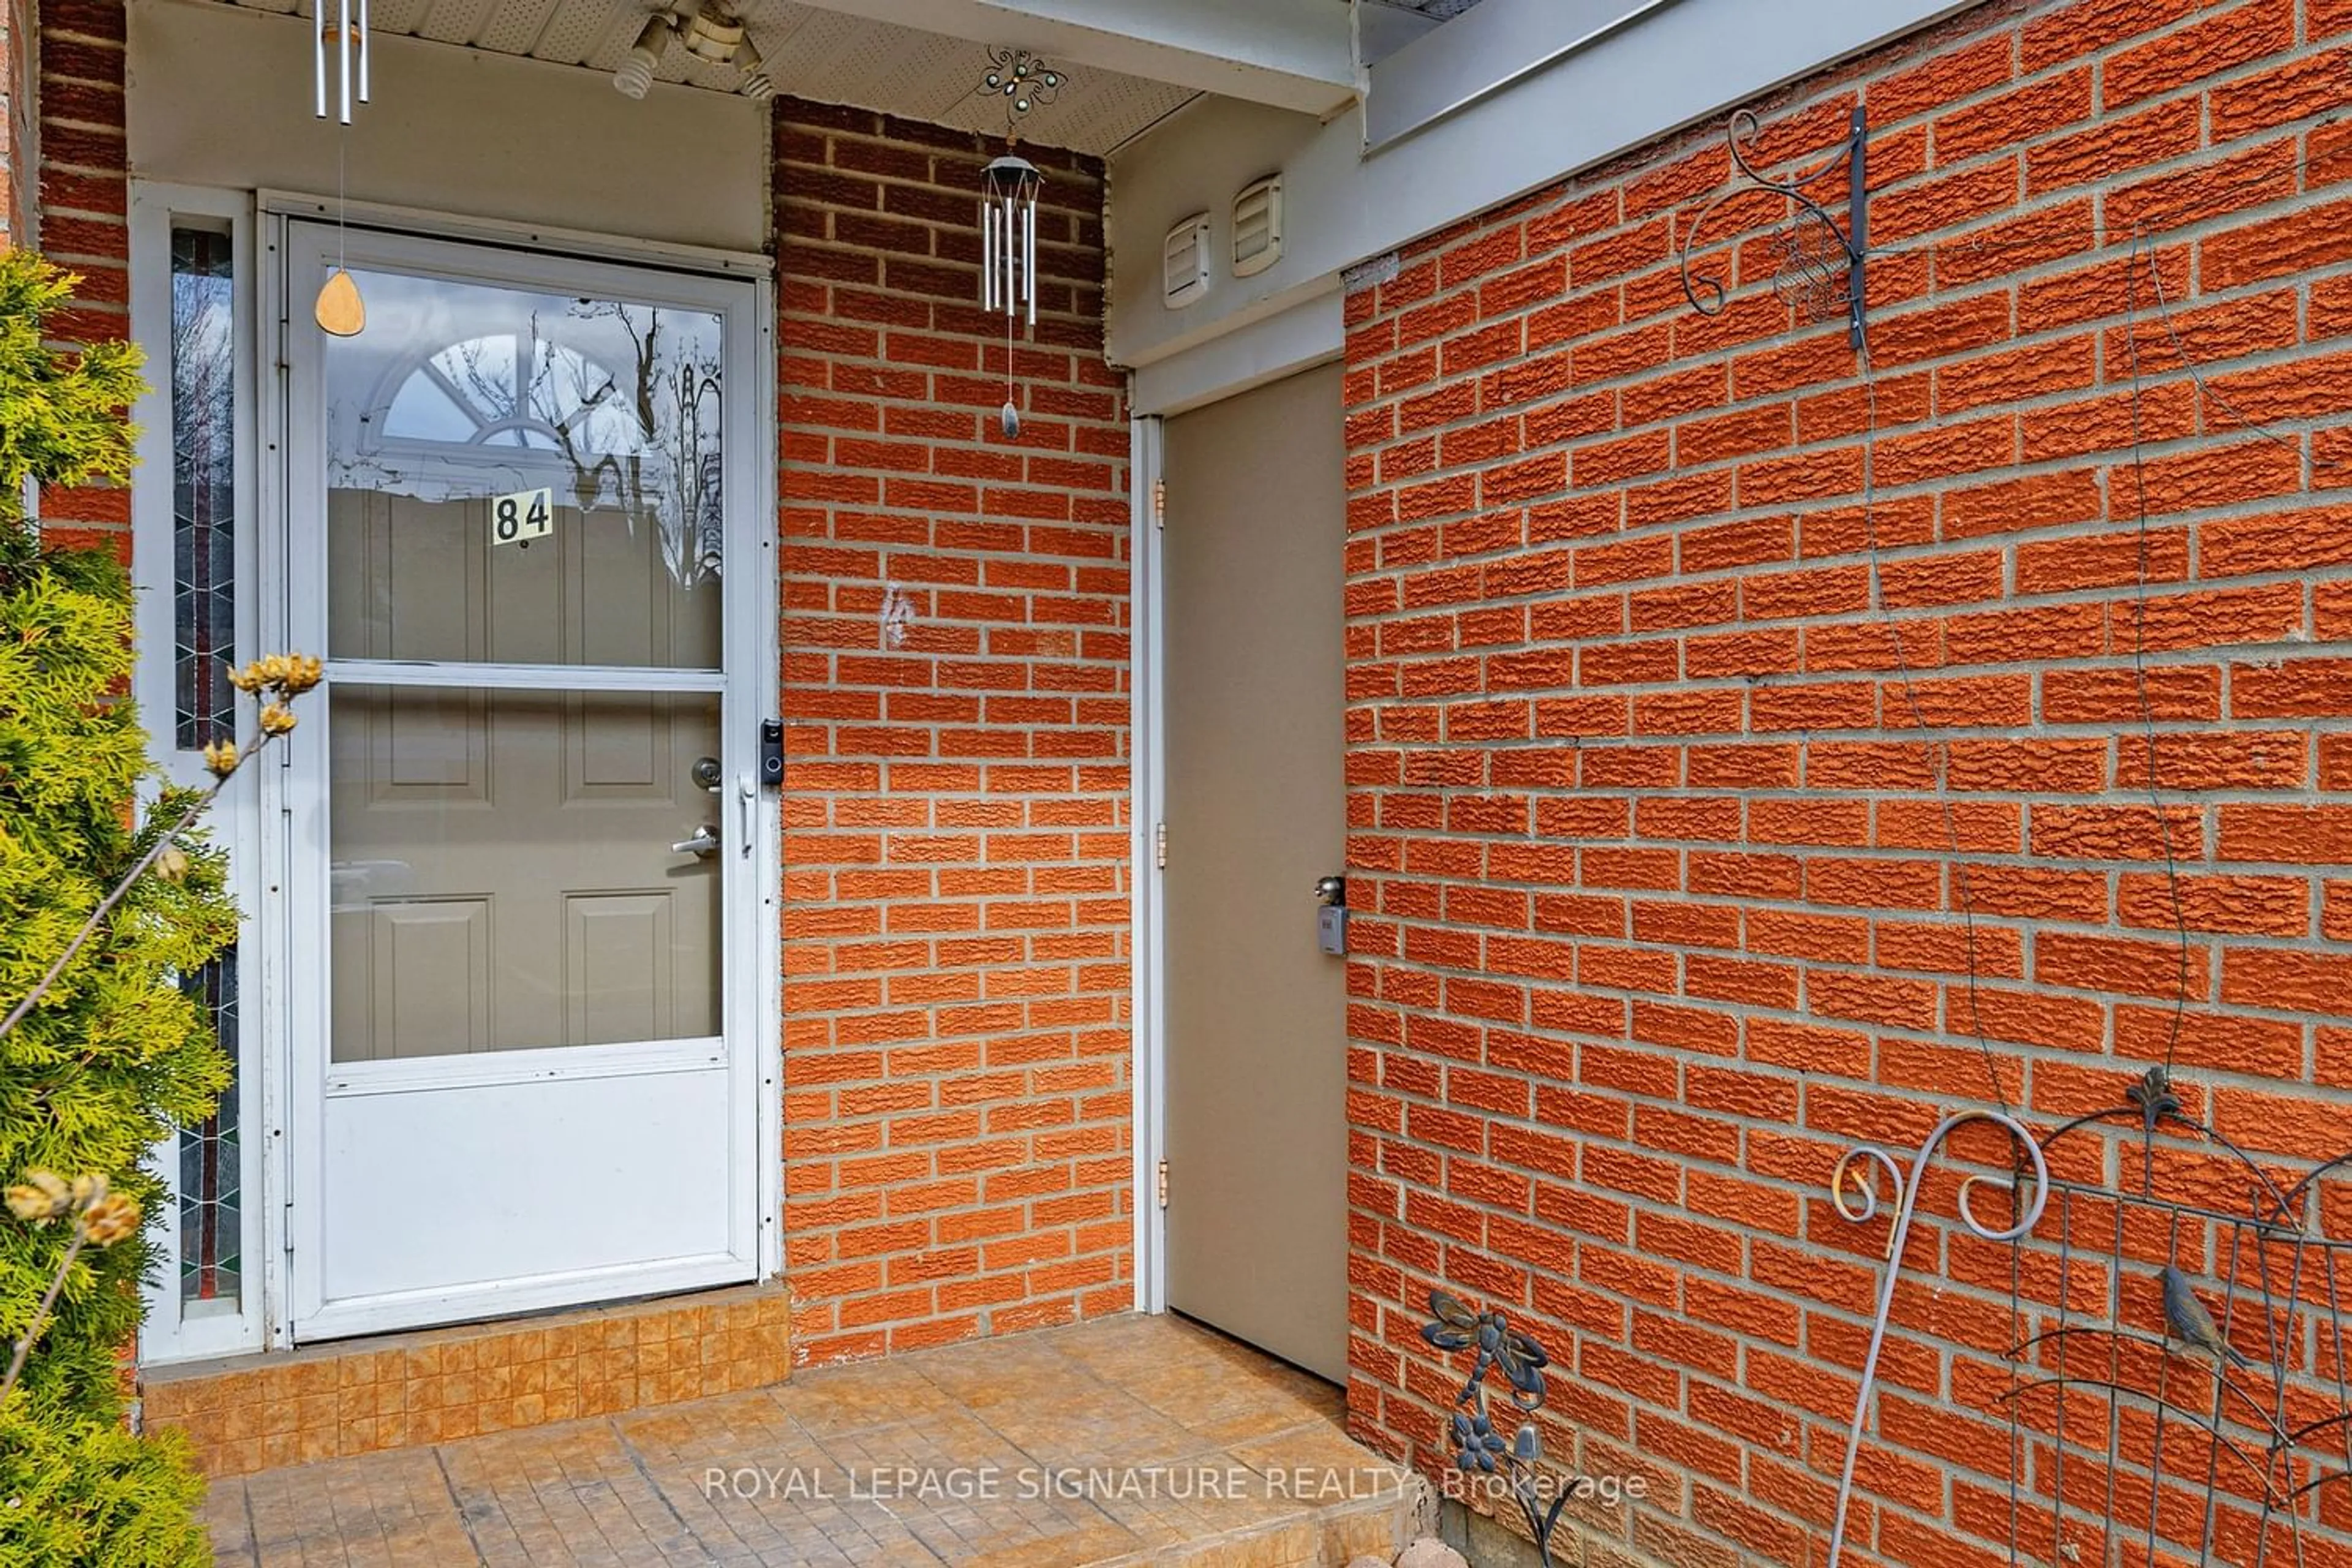 Home with brick exterior material for 215 Mississauga Valley Blvd #84, Mississauga Ontario L5A 1Y7